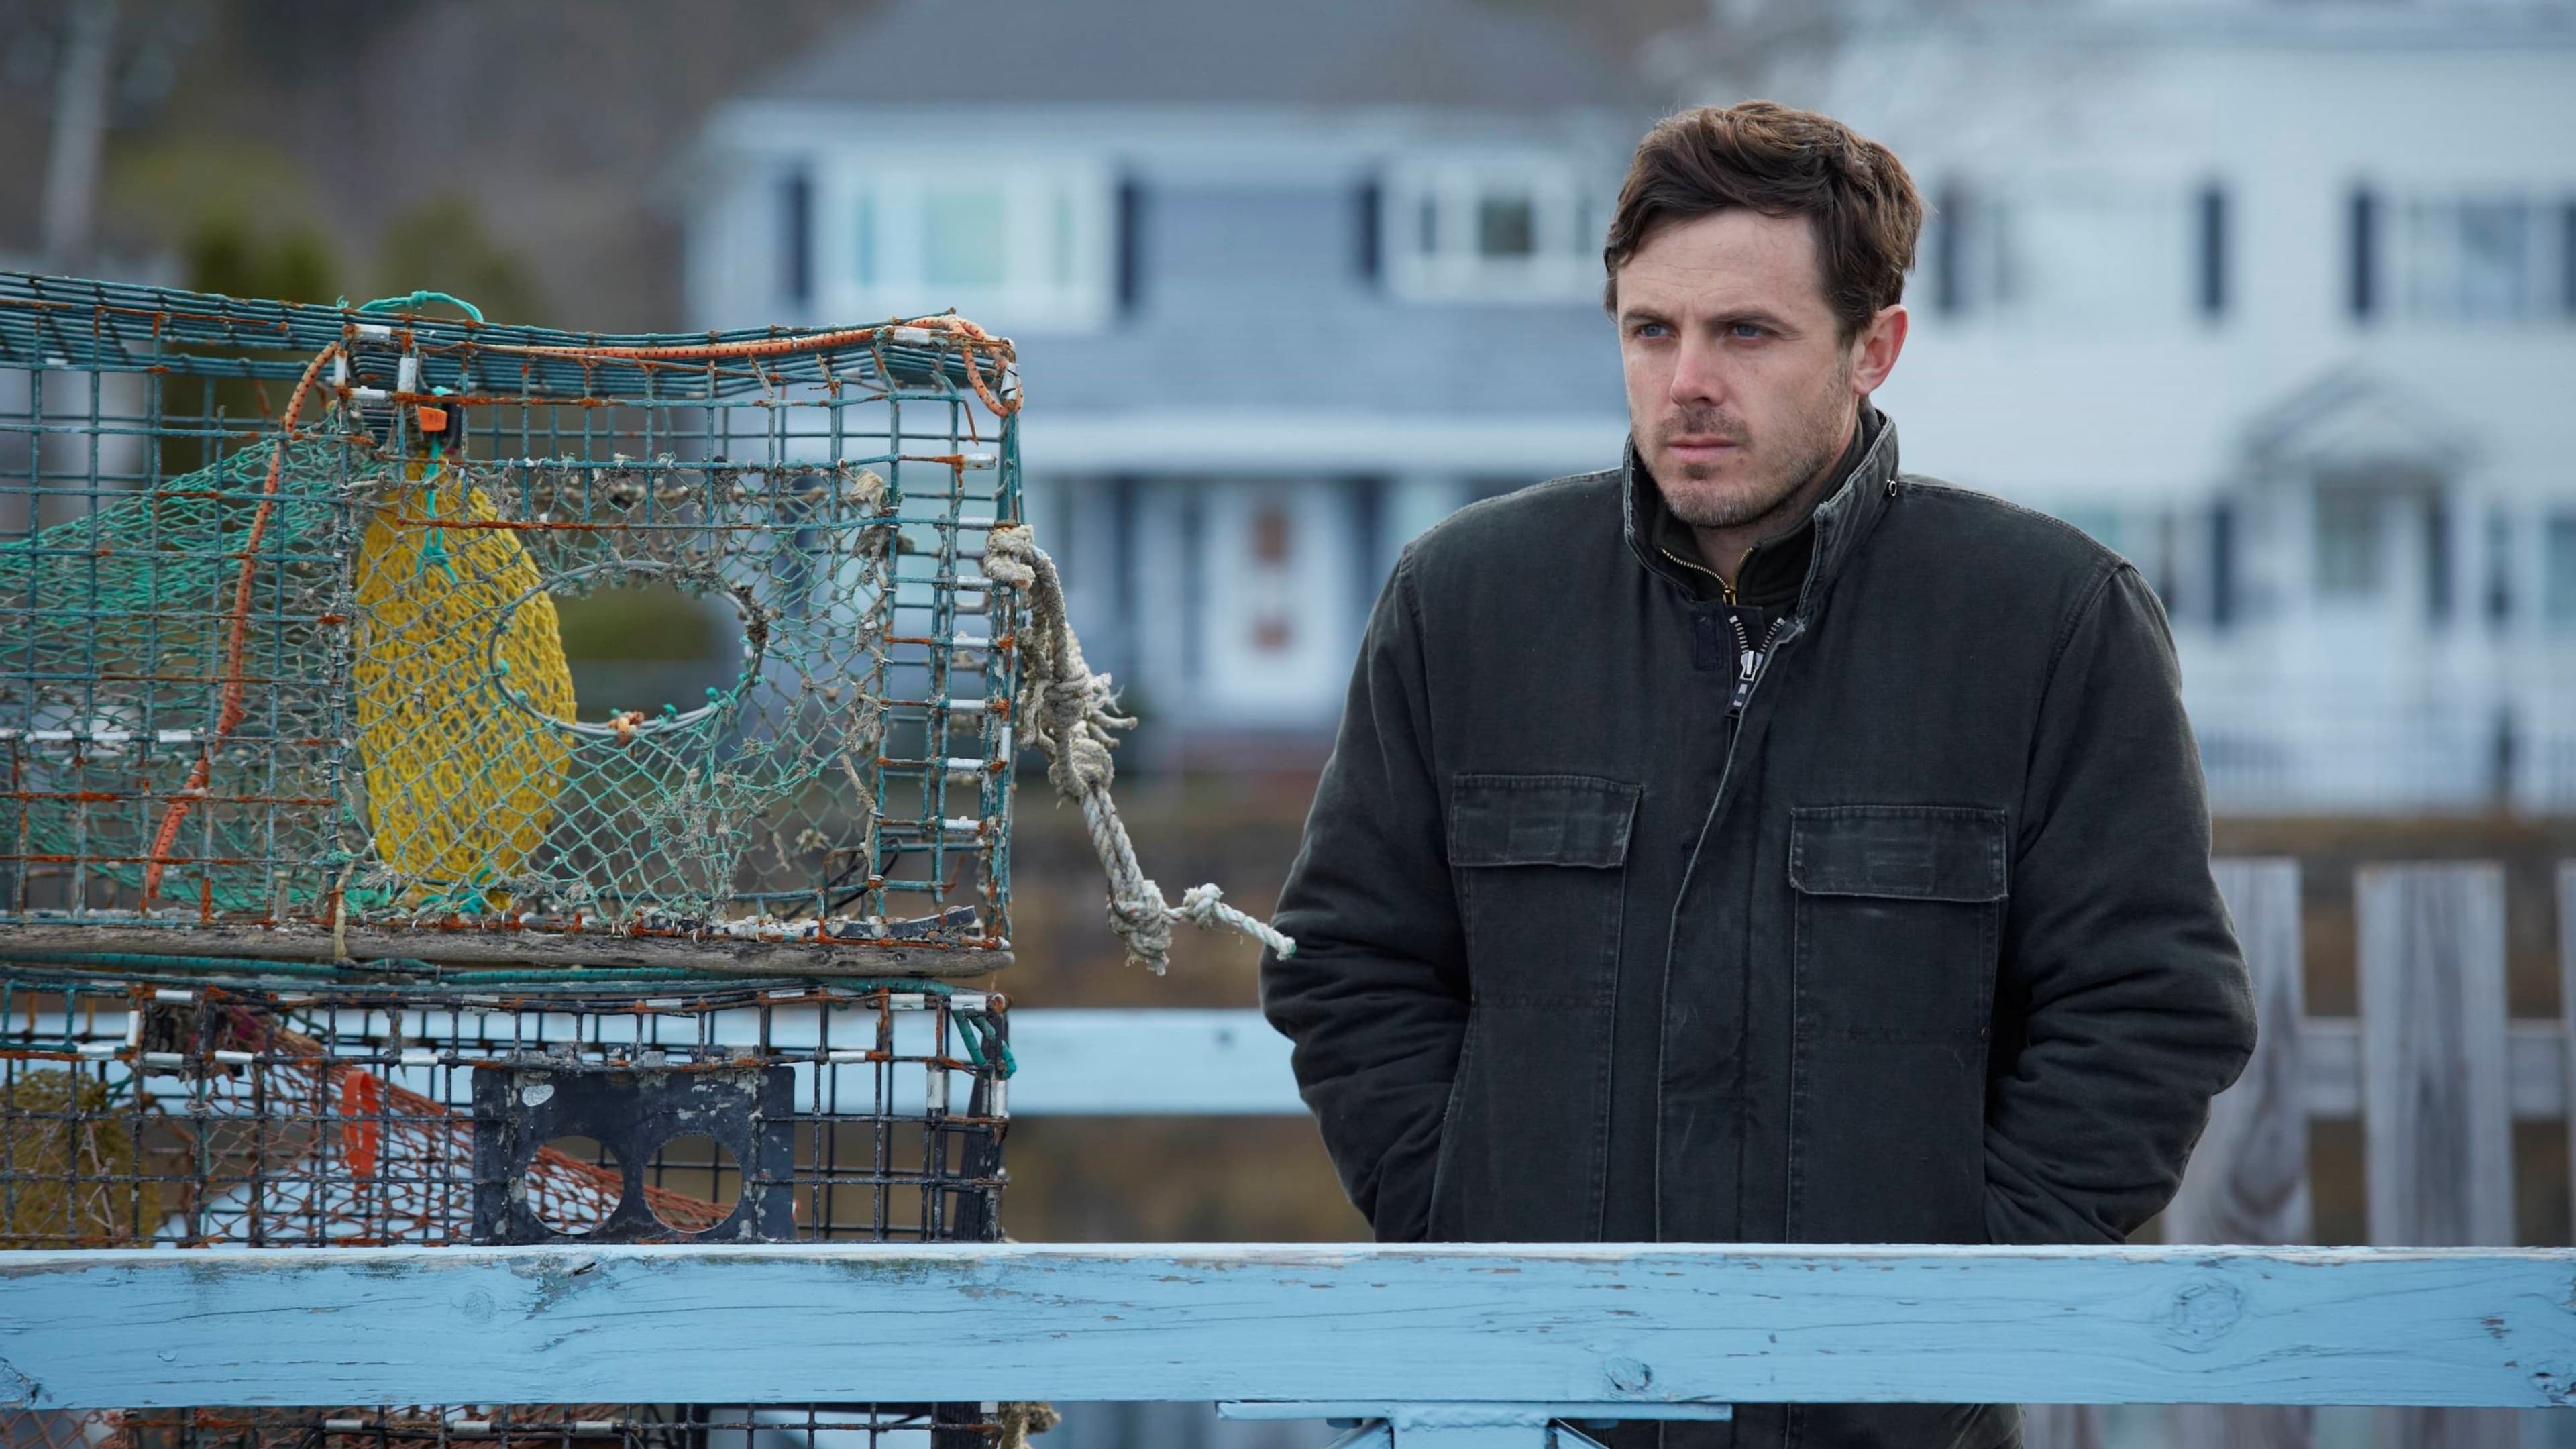 Image du film Manchester by the Sea epoifowvbnbooab5qk79i5mhdbmjpg